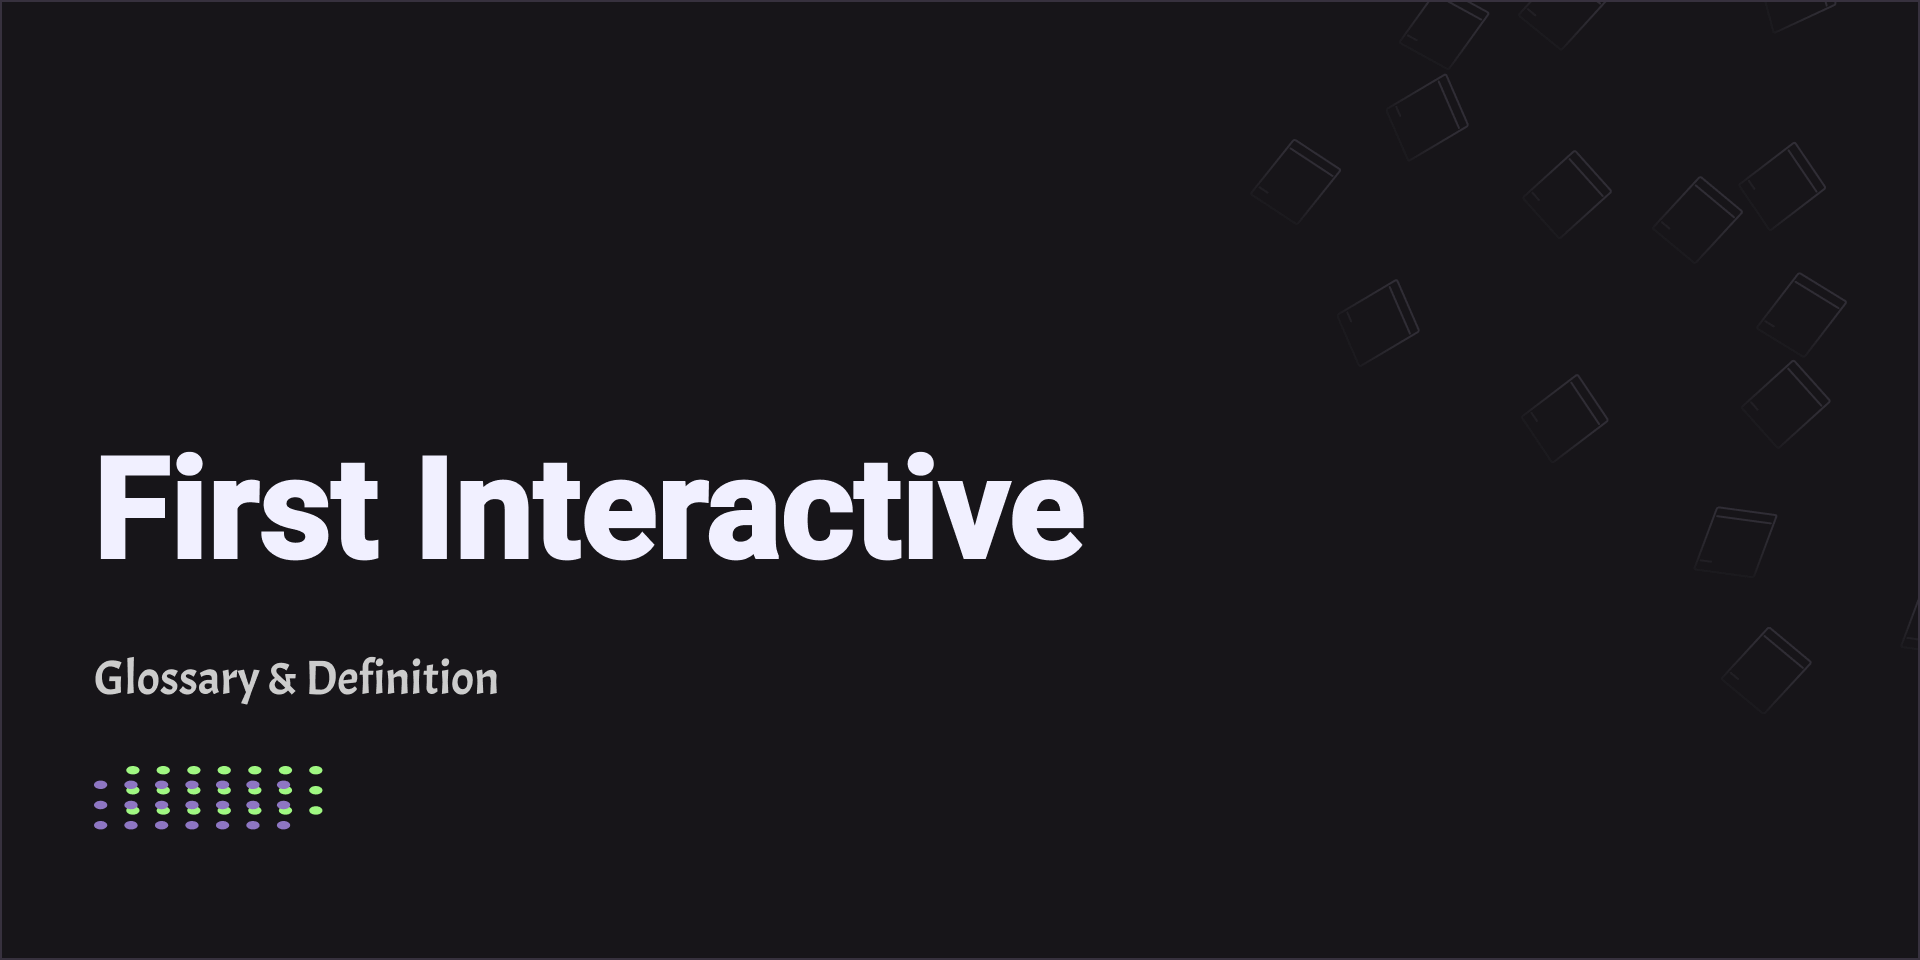 First Interactive